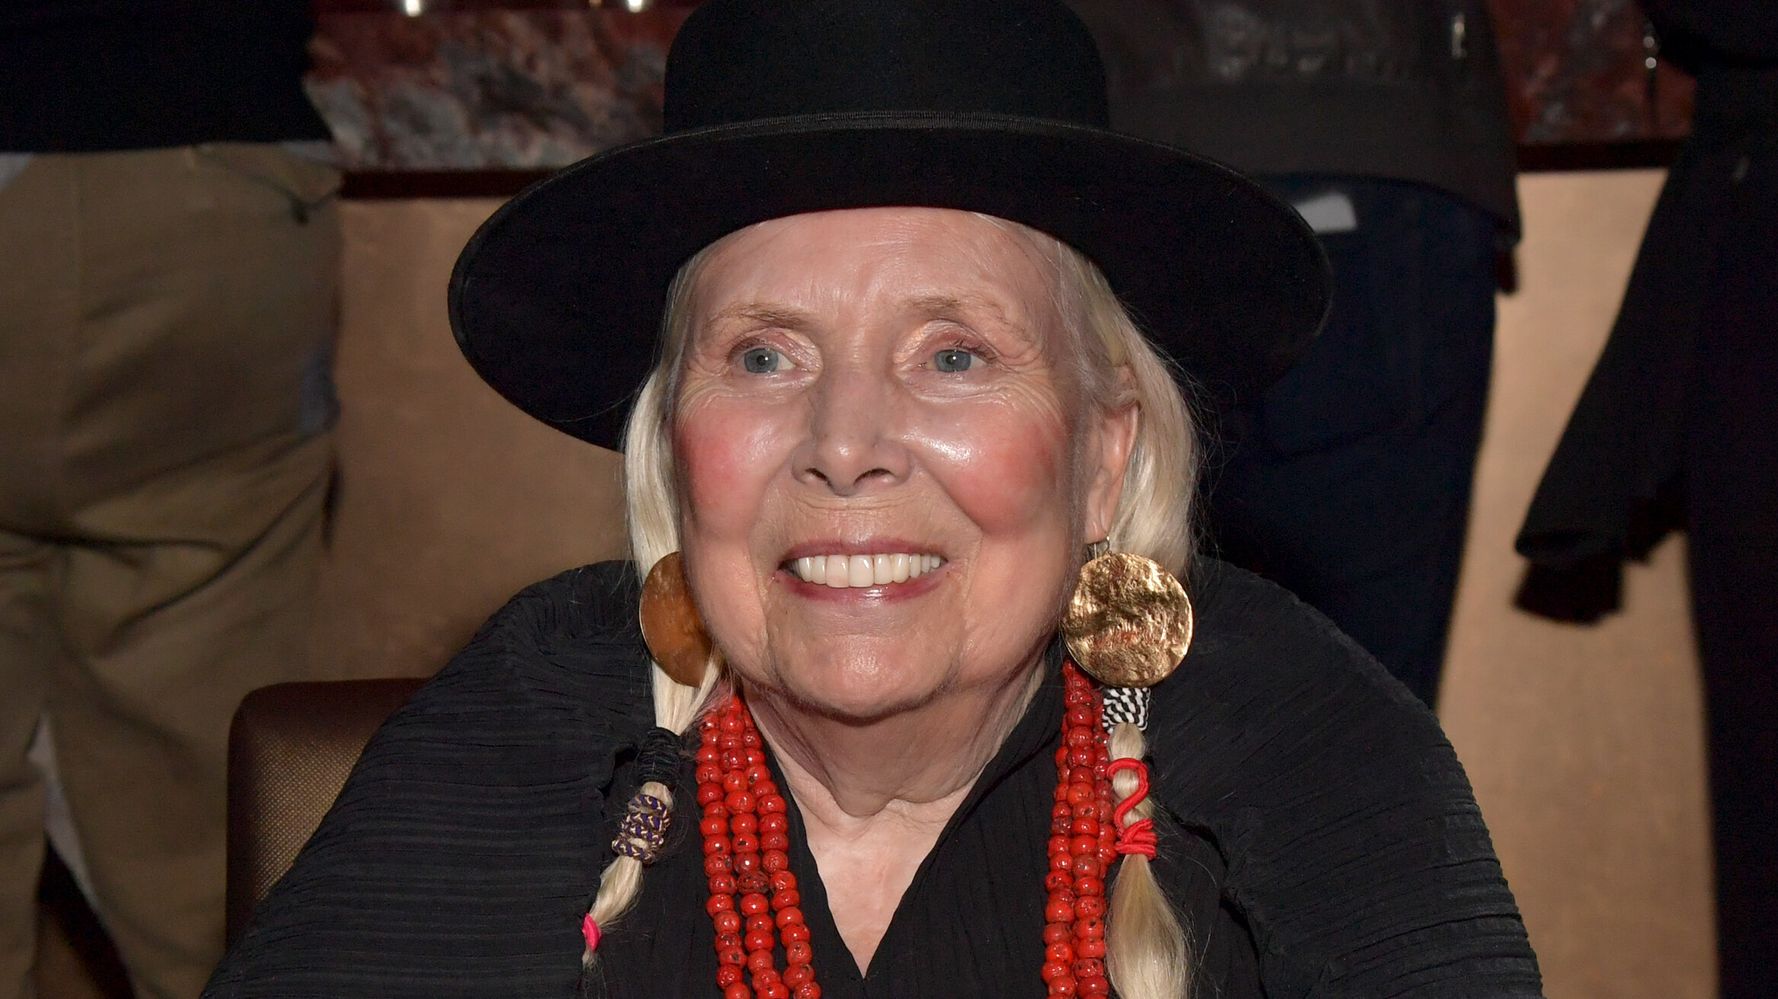 Joni Mitchell Calls For Spotify To Remove Her Music Amid Row Over Covid Misinformation